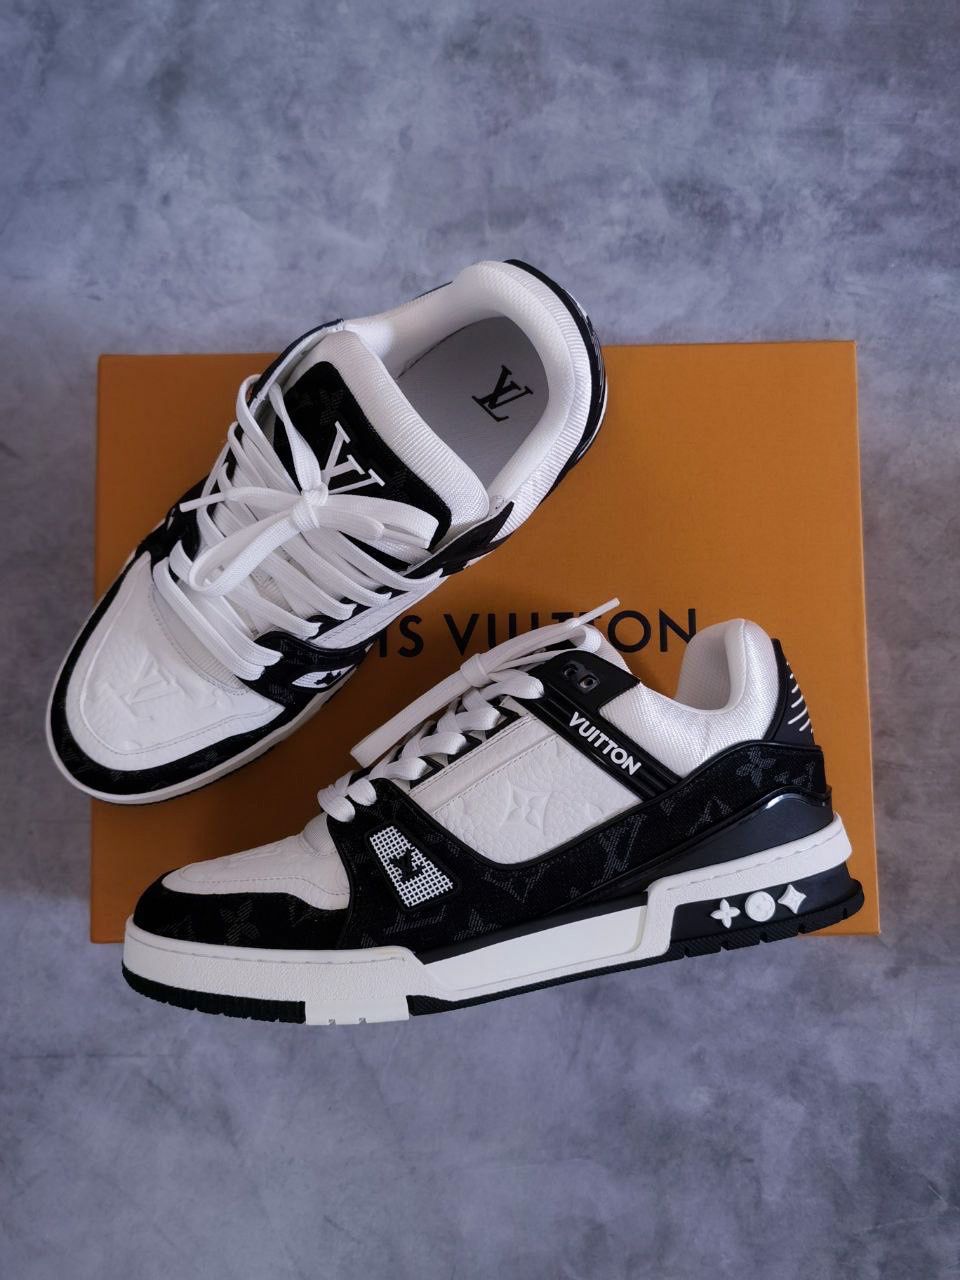 louis vuitton trainer black and white